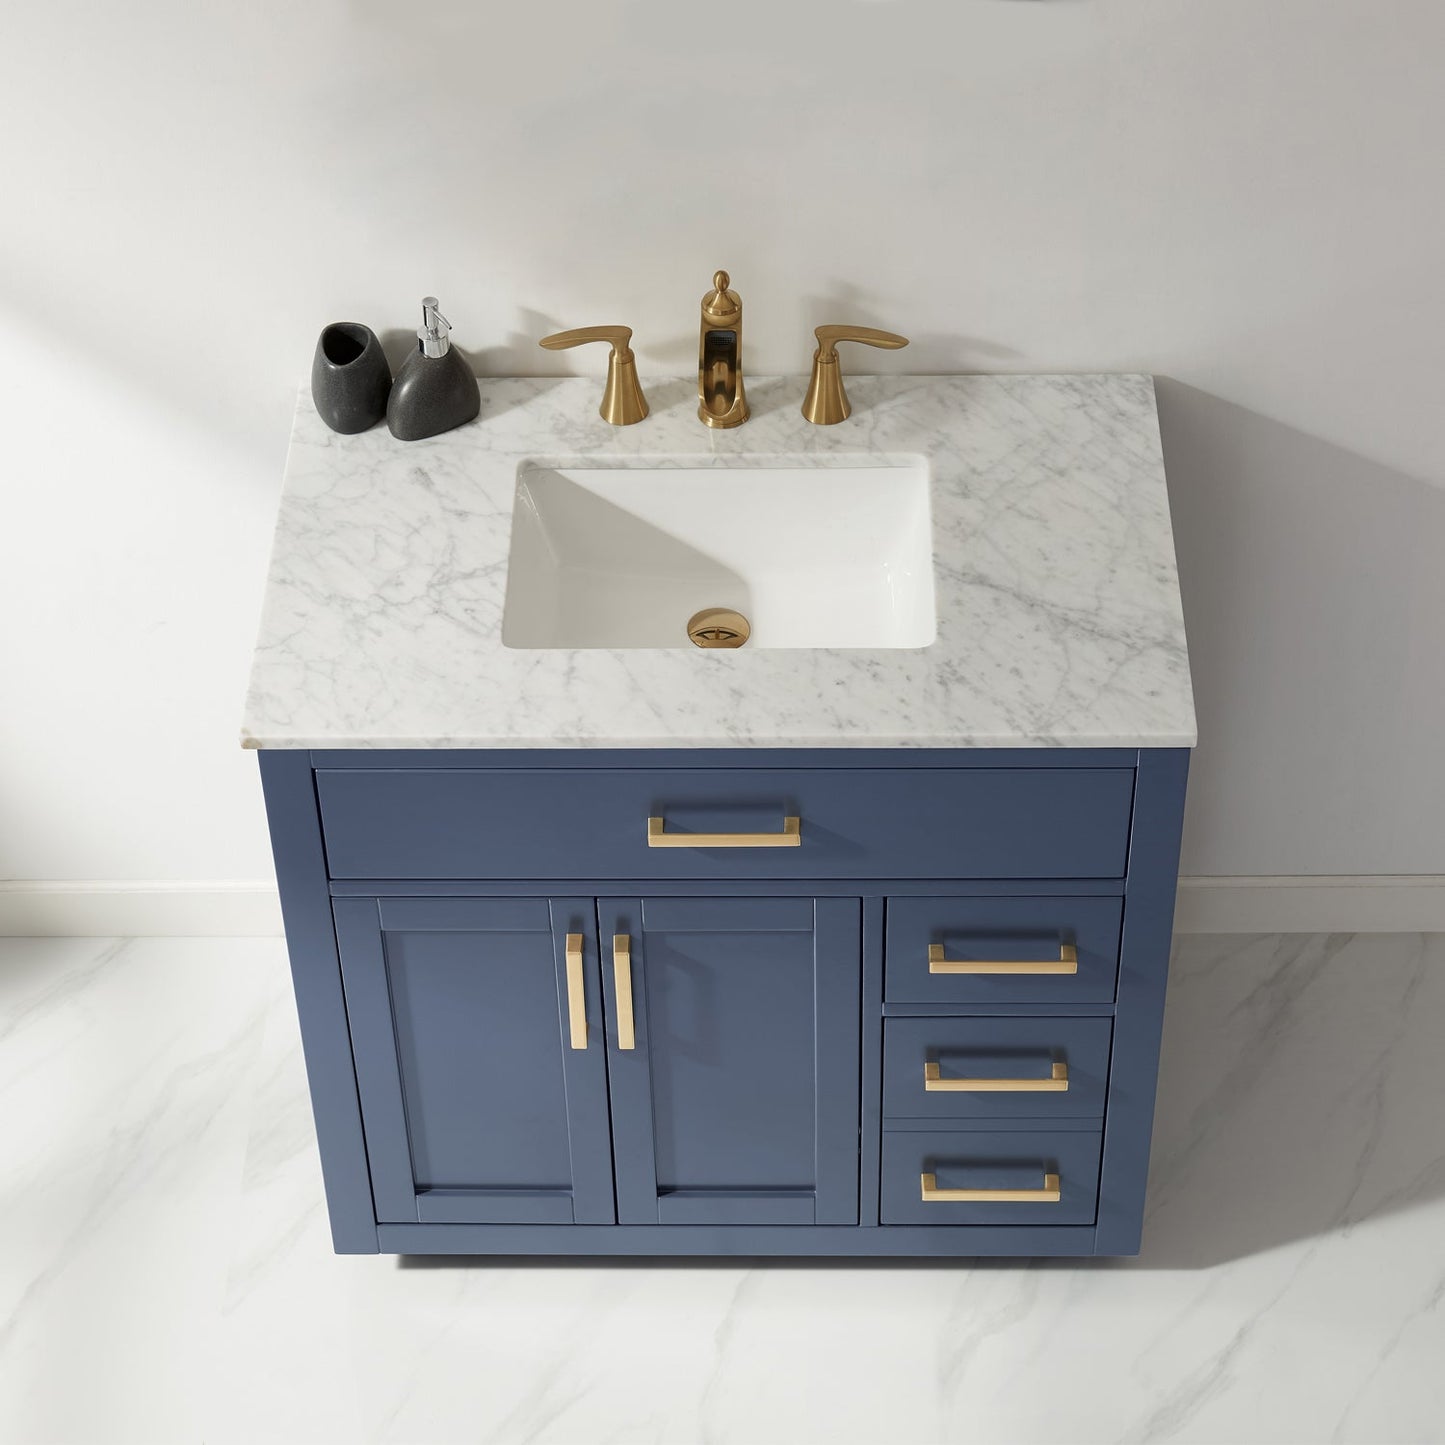 Ivy 36" Single Bathroom Vanity Set in Royal Blue and Carrara White Marble Countertop without Mirror